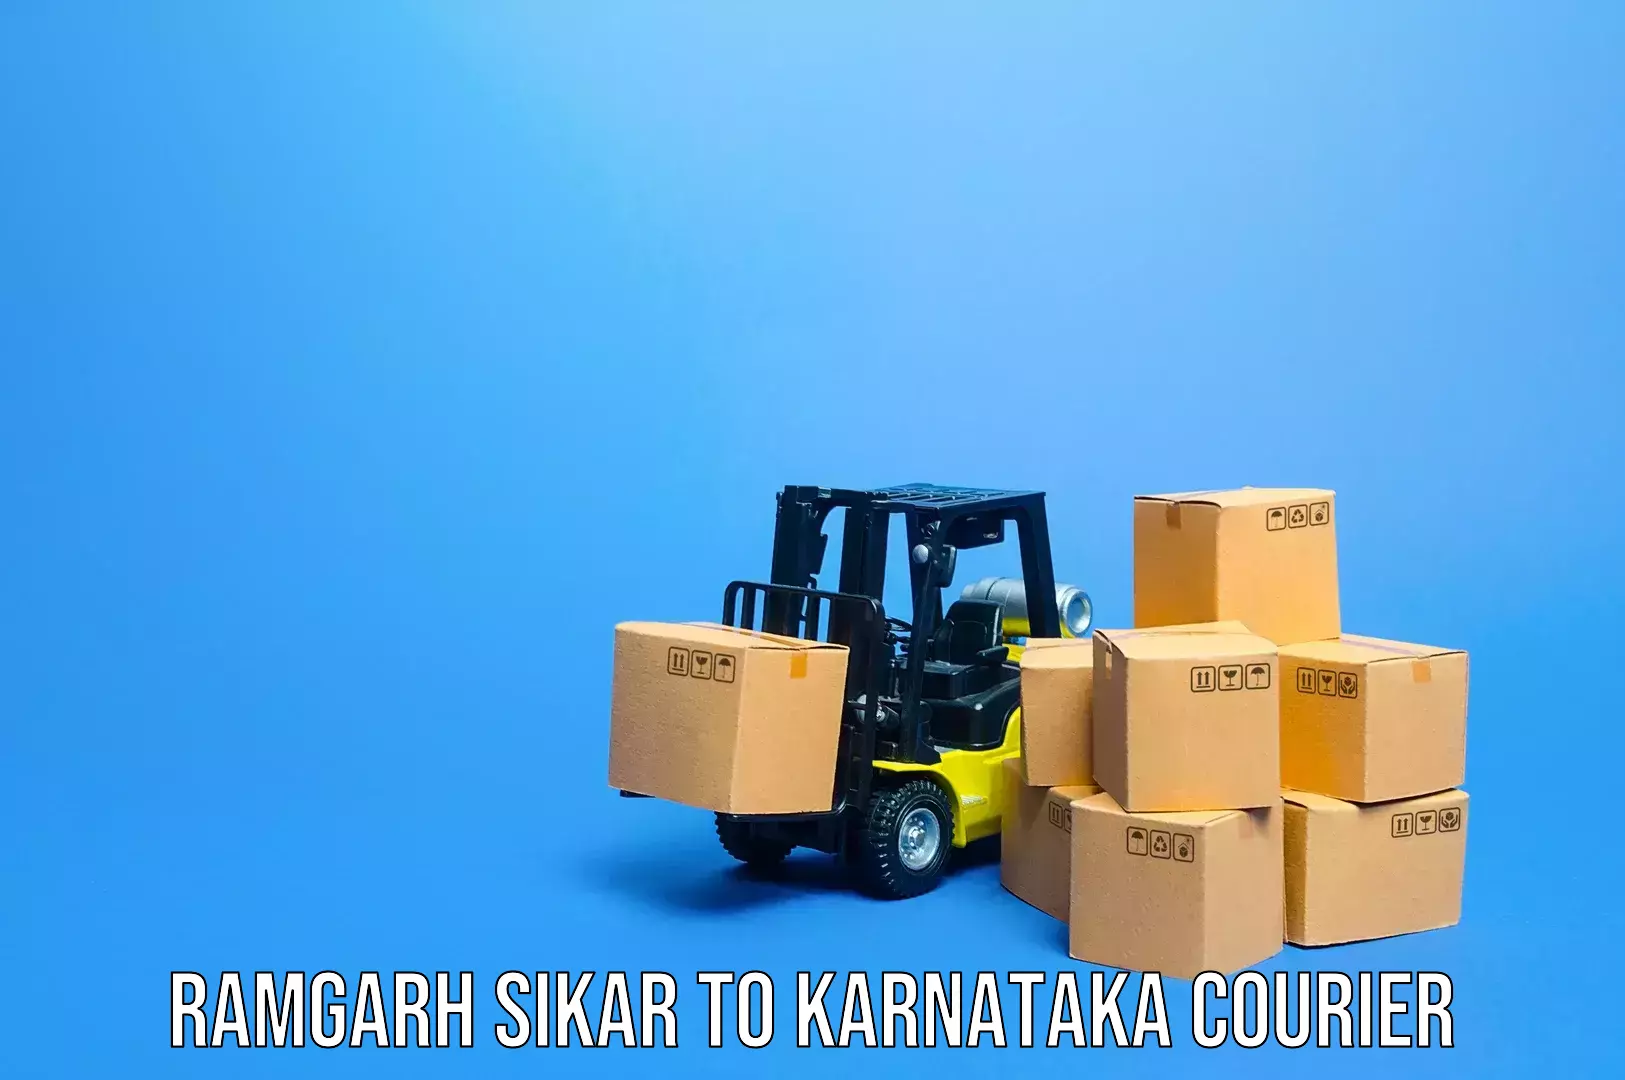 Luggage delivery logistics Ramgarh Sikar to Manipal Academy of Higher Education